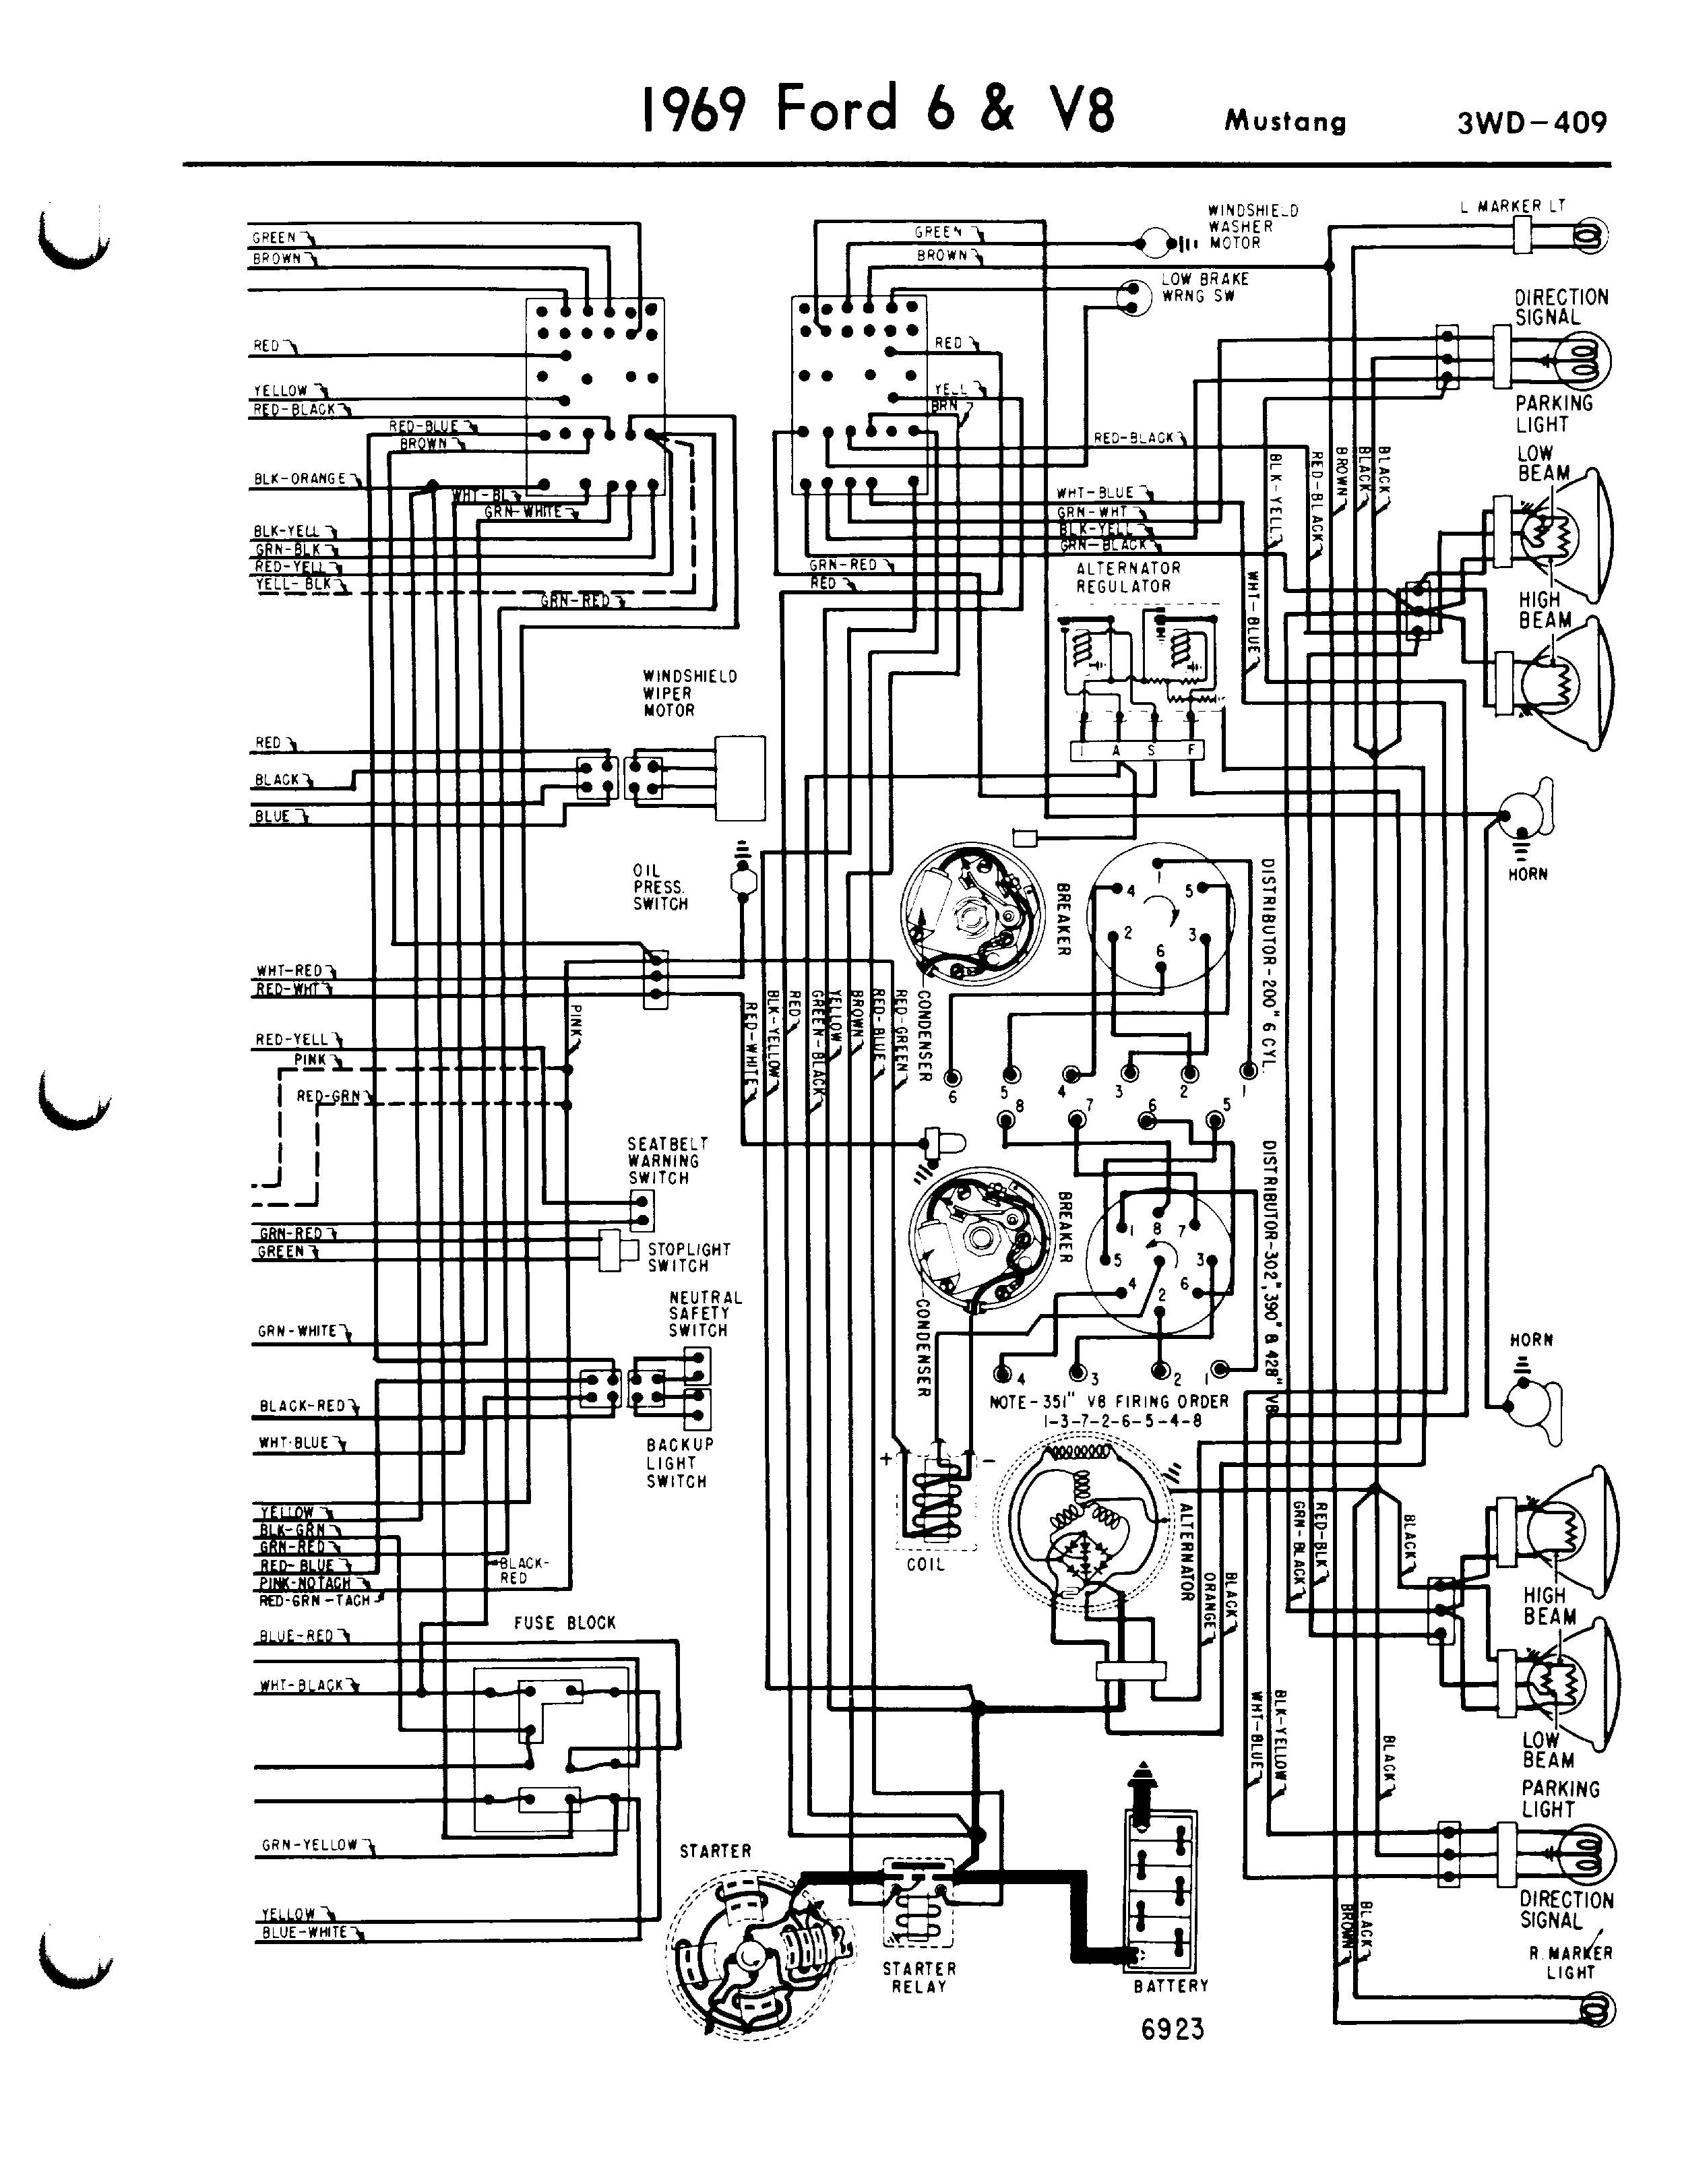 1970 Ford Mustang Ignition Switch Wiring Diagram